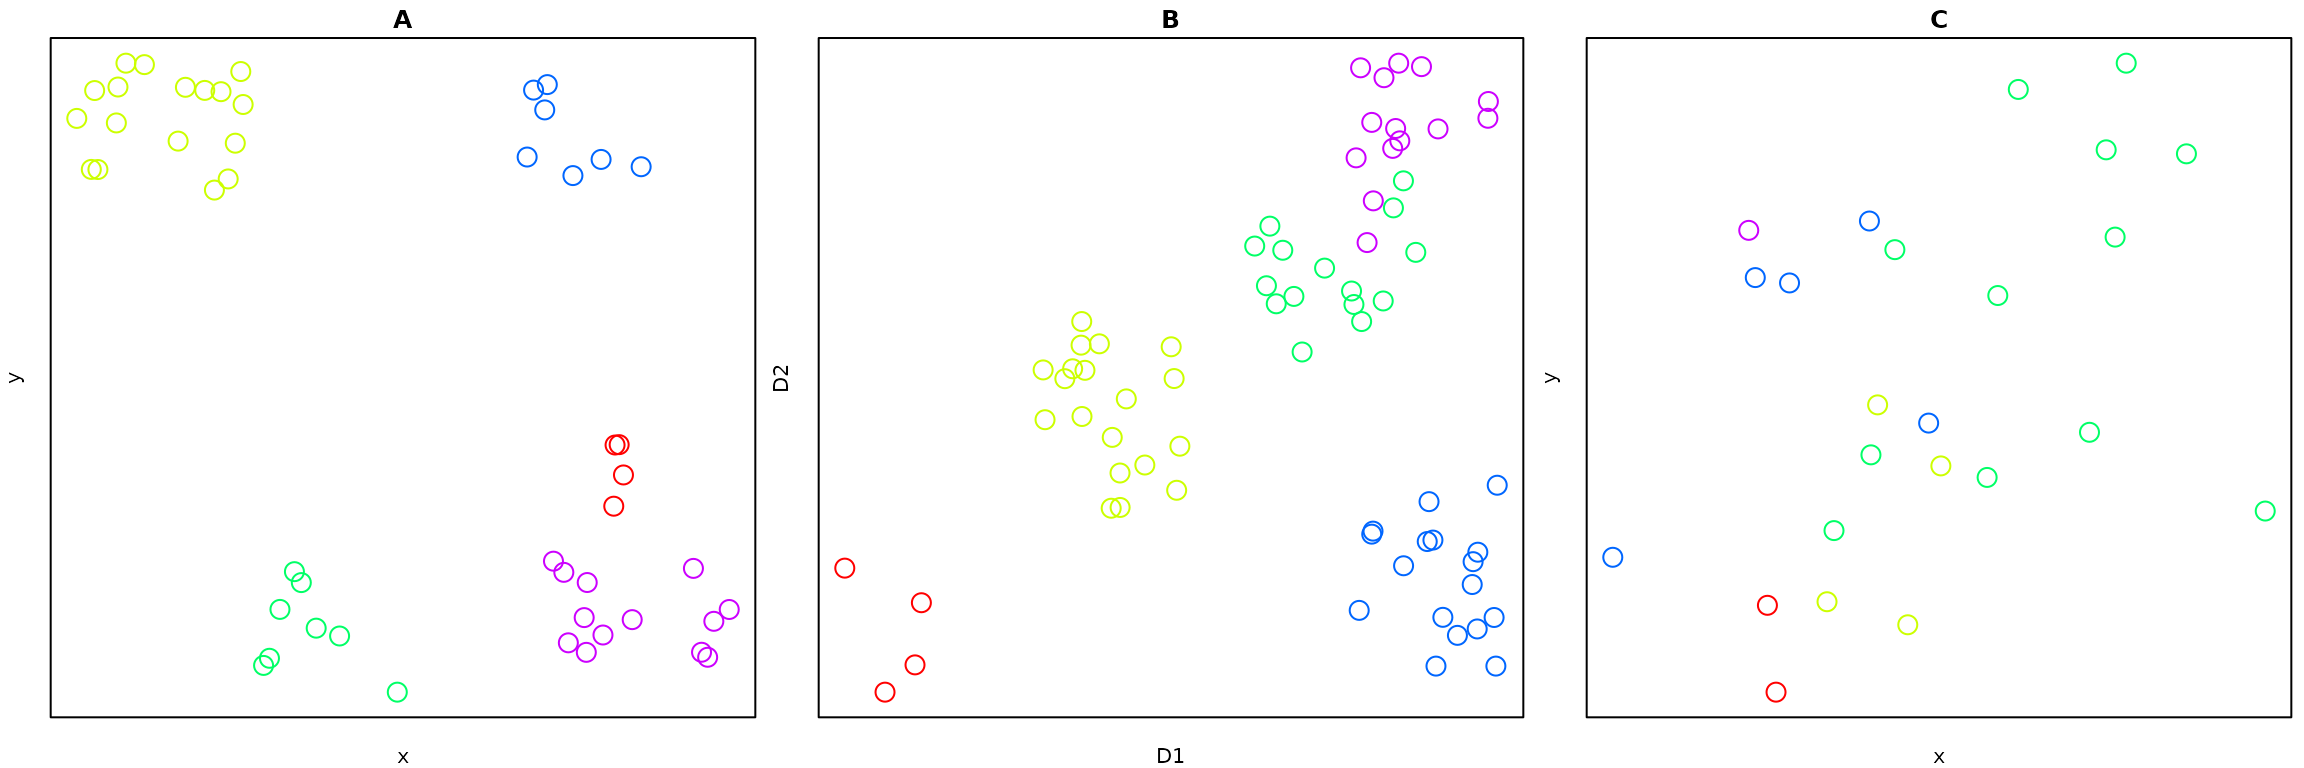 Figure 1: (A) Illustration of typical spatial clustering application for which input data are explicit spatial distances between points; (B) Illustration of clustering in some other, non-spatial dimensions, D1 and D2, for which associated spatial data in (C) do not manifest clear spatial clusters.